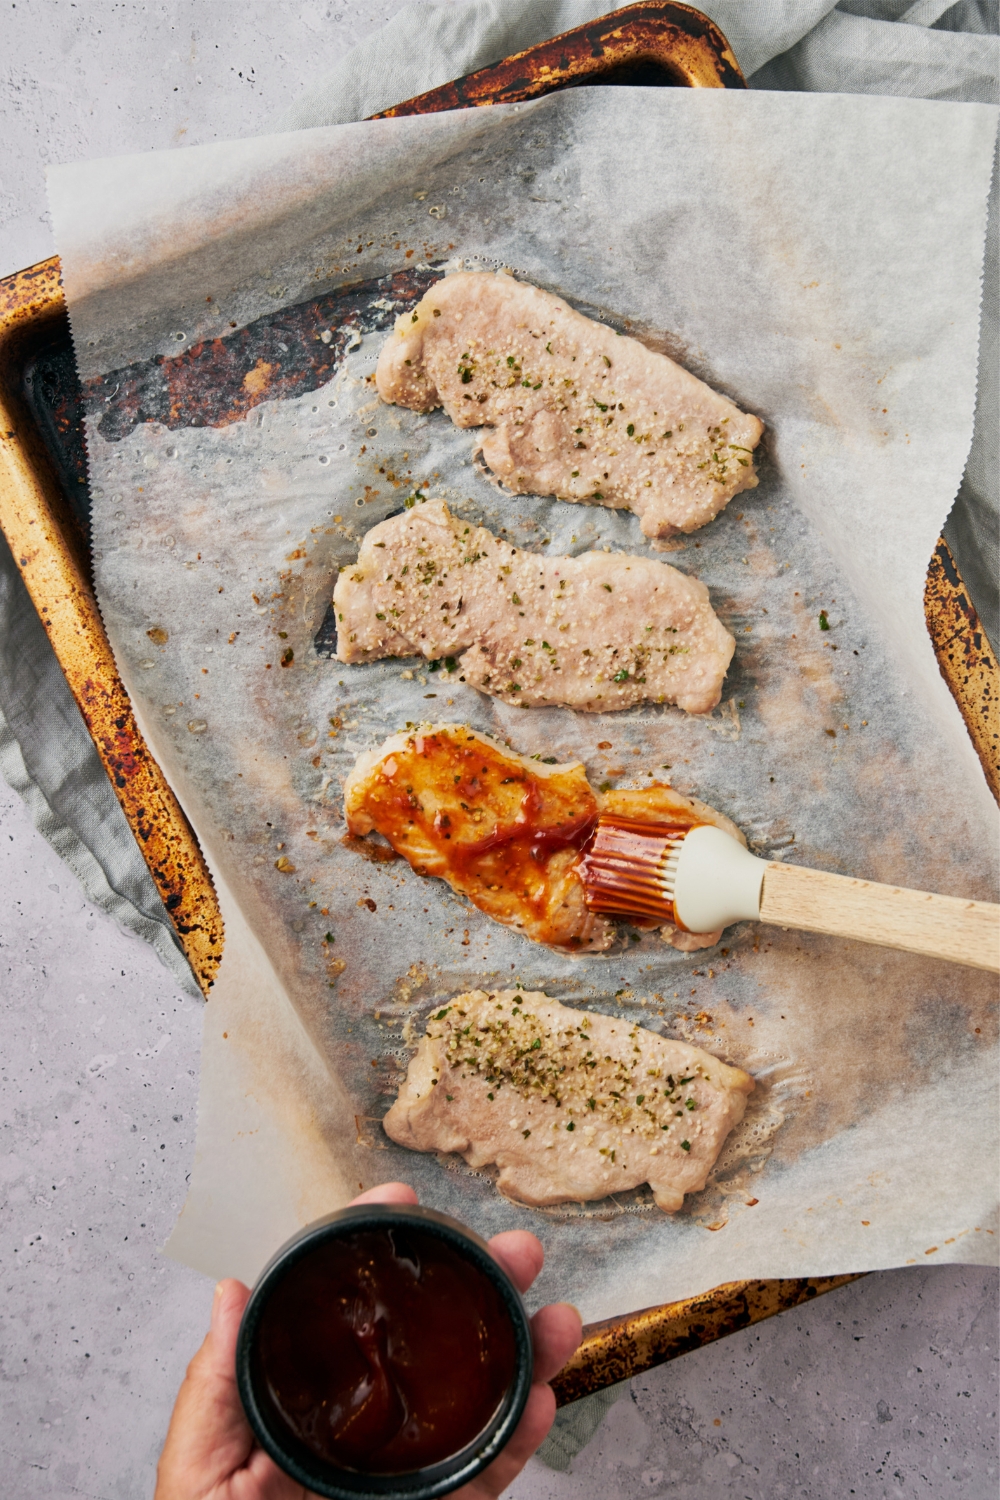 BBQ sauce being brushed onto seasoned pork chops on a parchment paper lined baking sheet using a pastry brush.